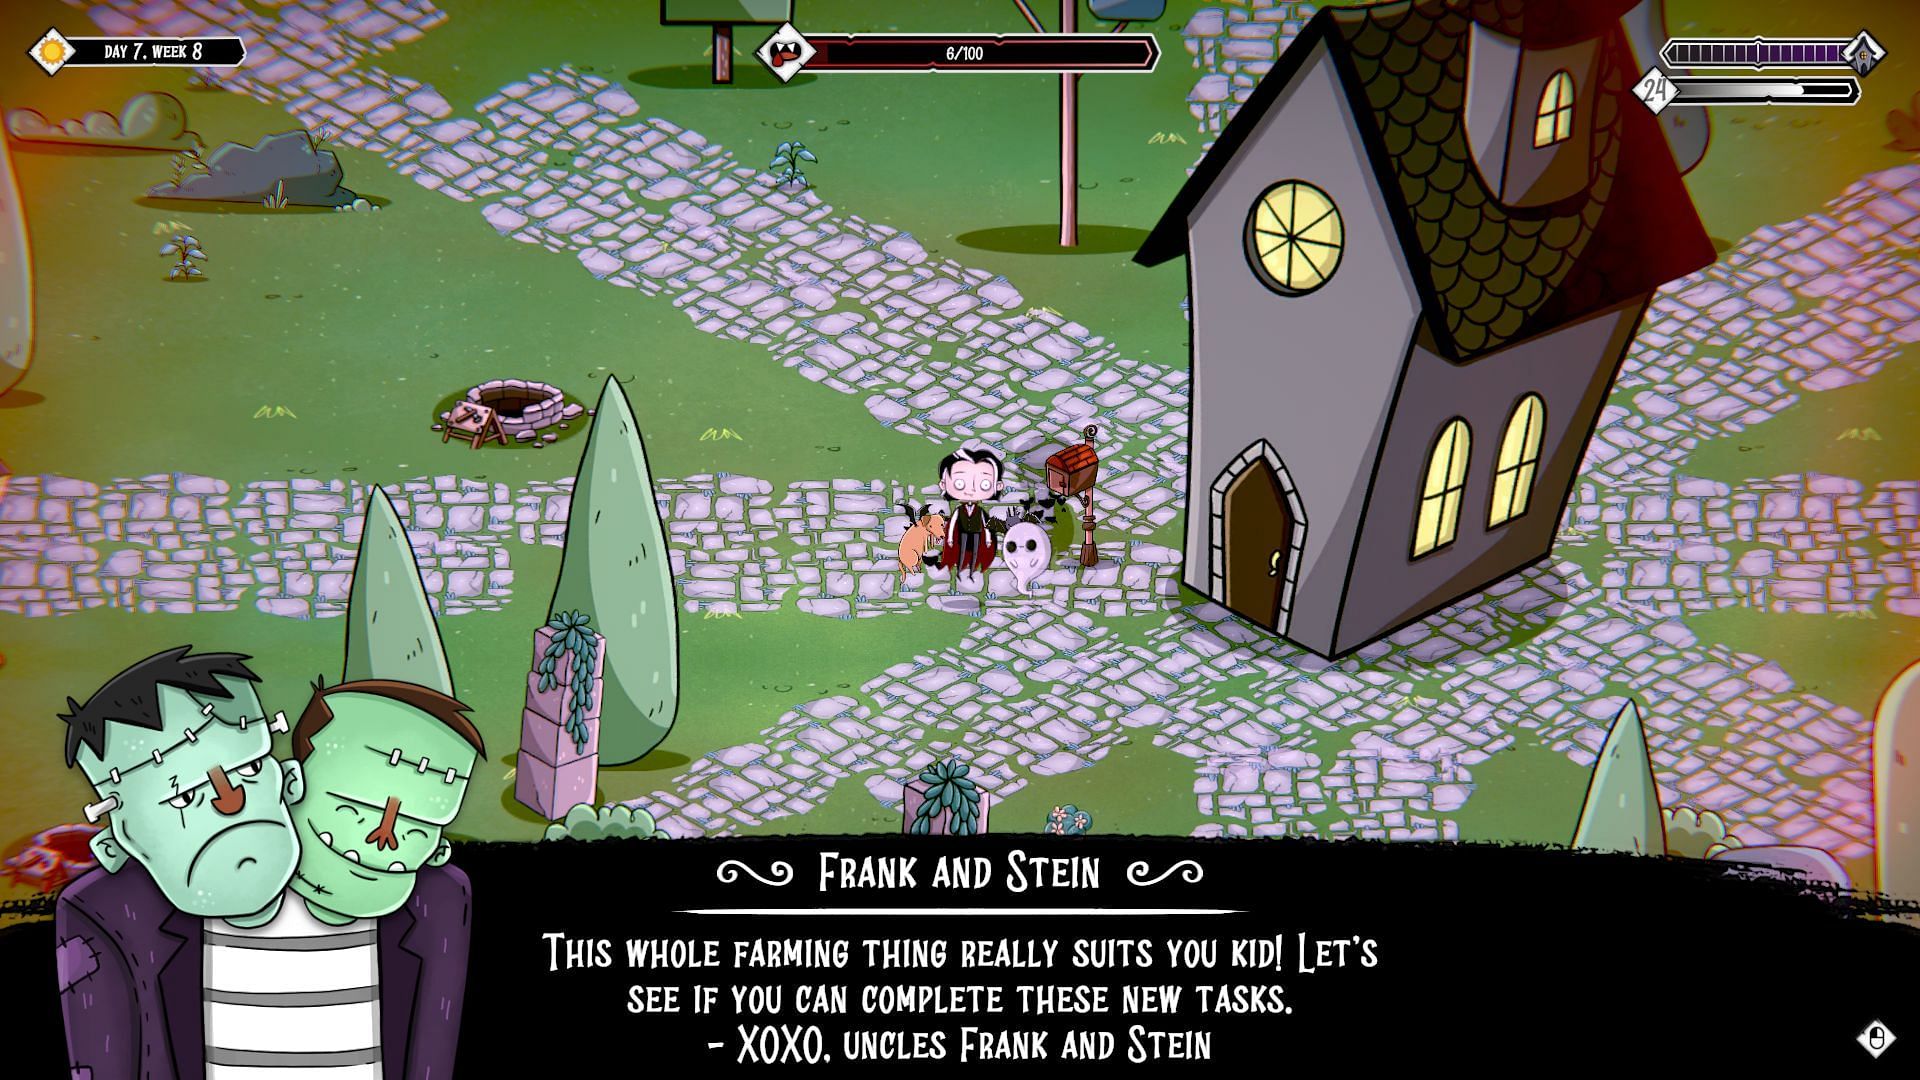 Uncle Frank and Stein in Voltaire - The Vegan Vampire (Image via Digitality Games)